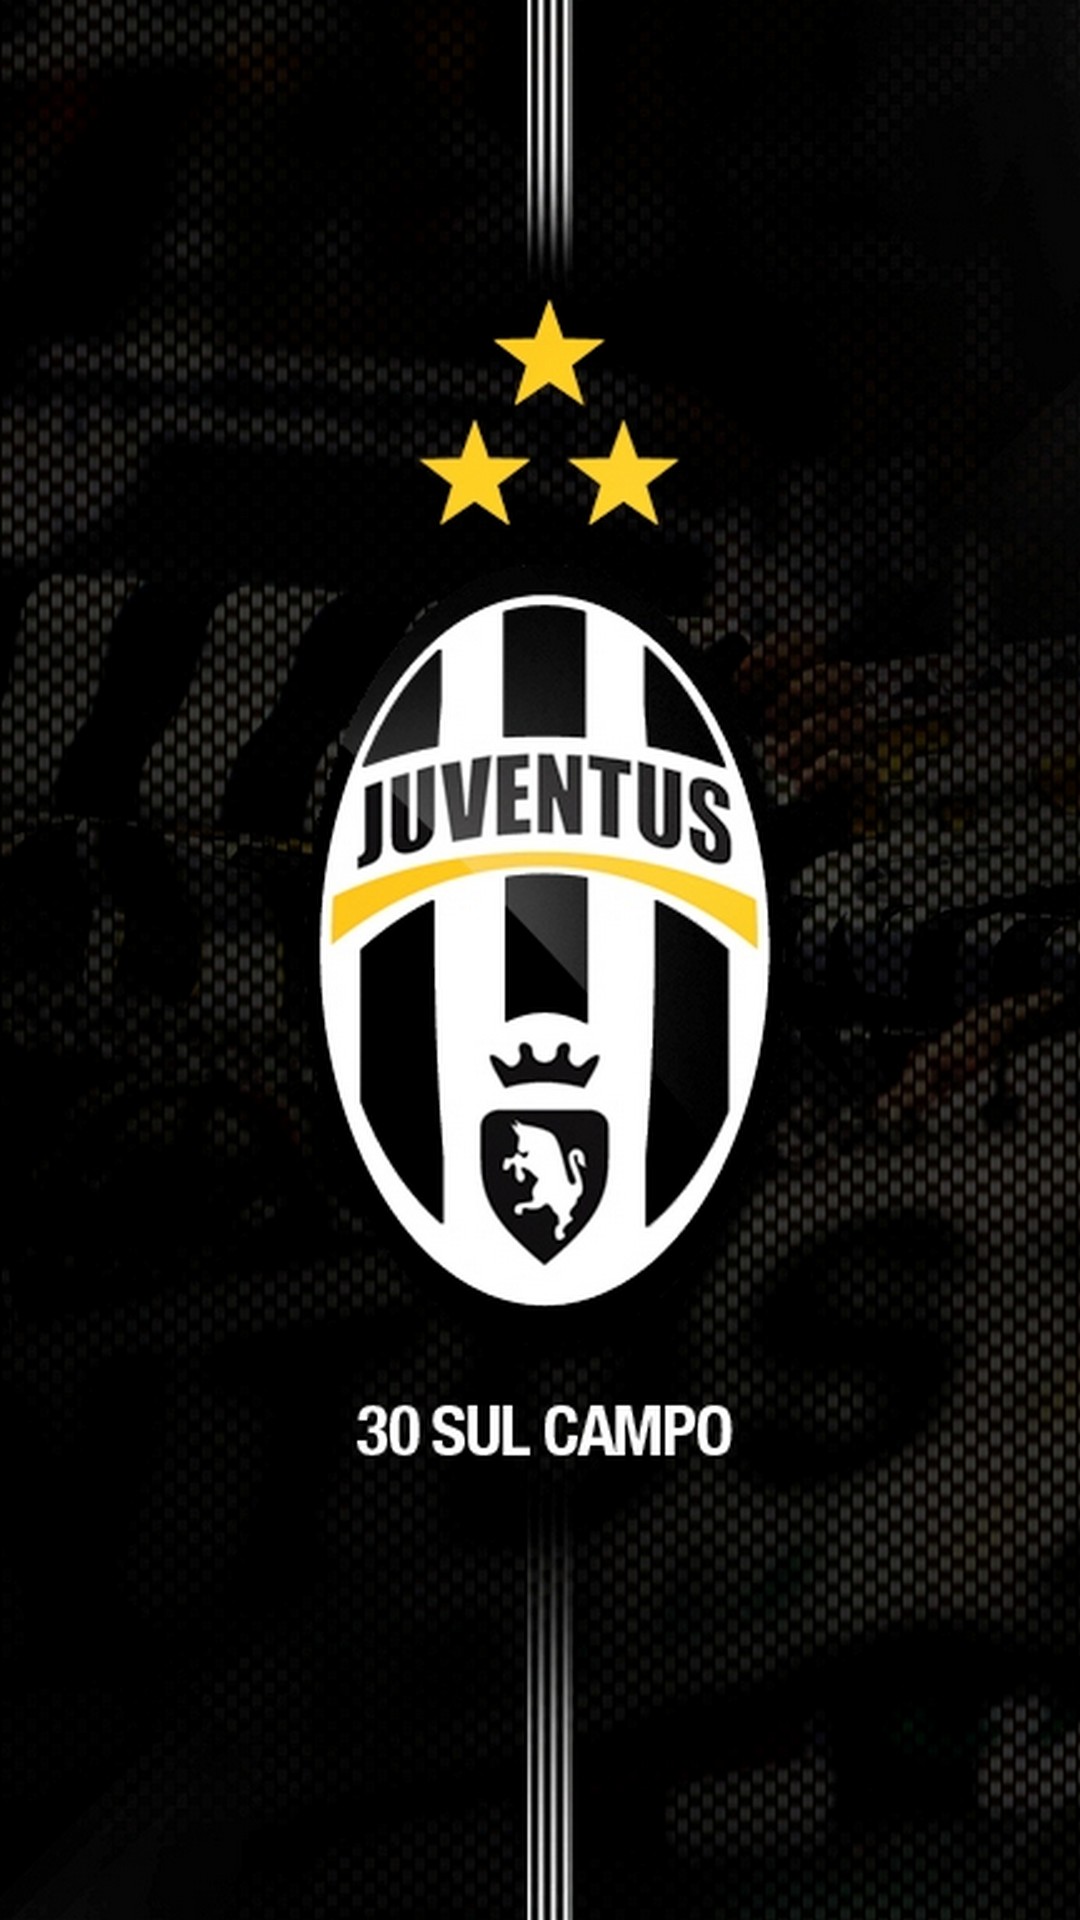 Juventus FC Wallpaper For iPhone 8 resolution 1080x1920